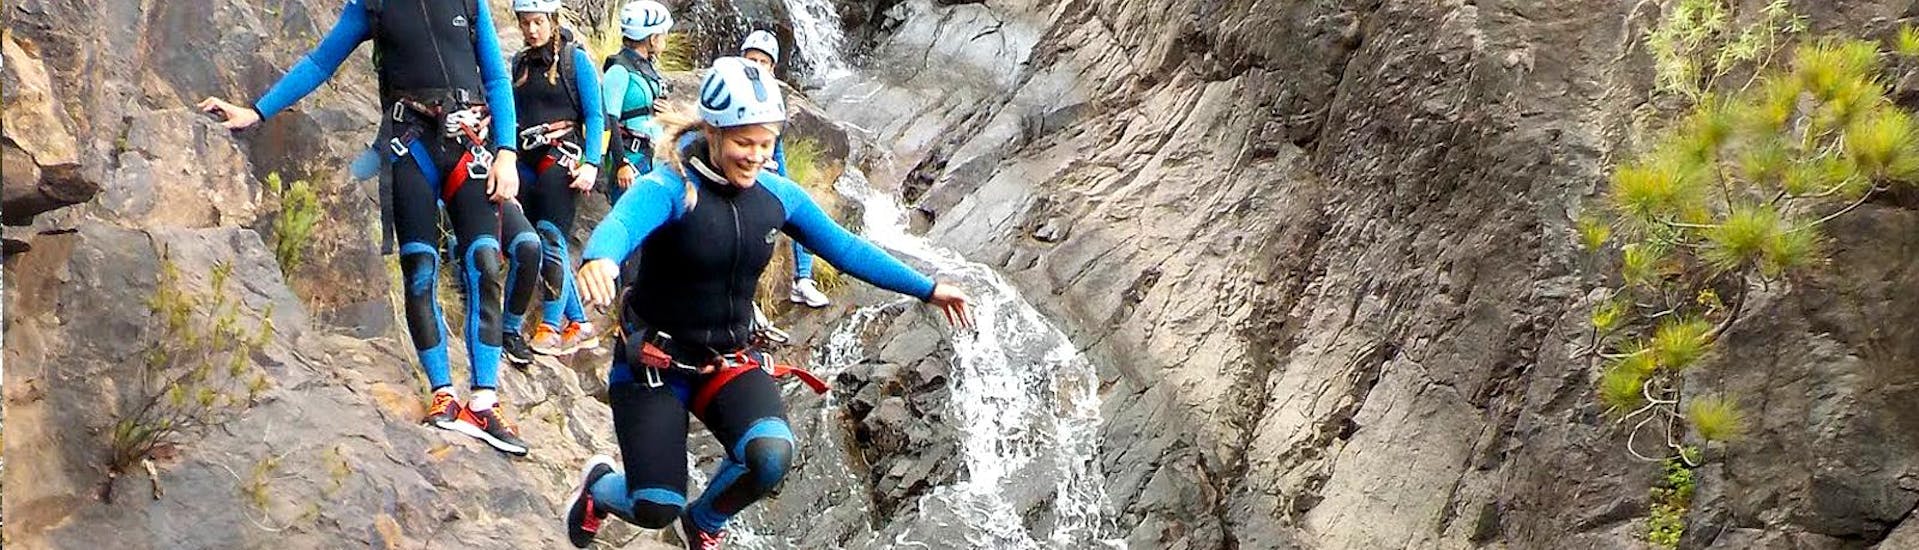 During the Canyoning at Barranco de la Manta in Gran Canaria a woman jumps from the cliff into the water under the supervision of the guide from Mojo Picón Aventura.